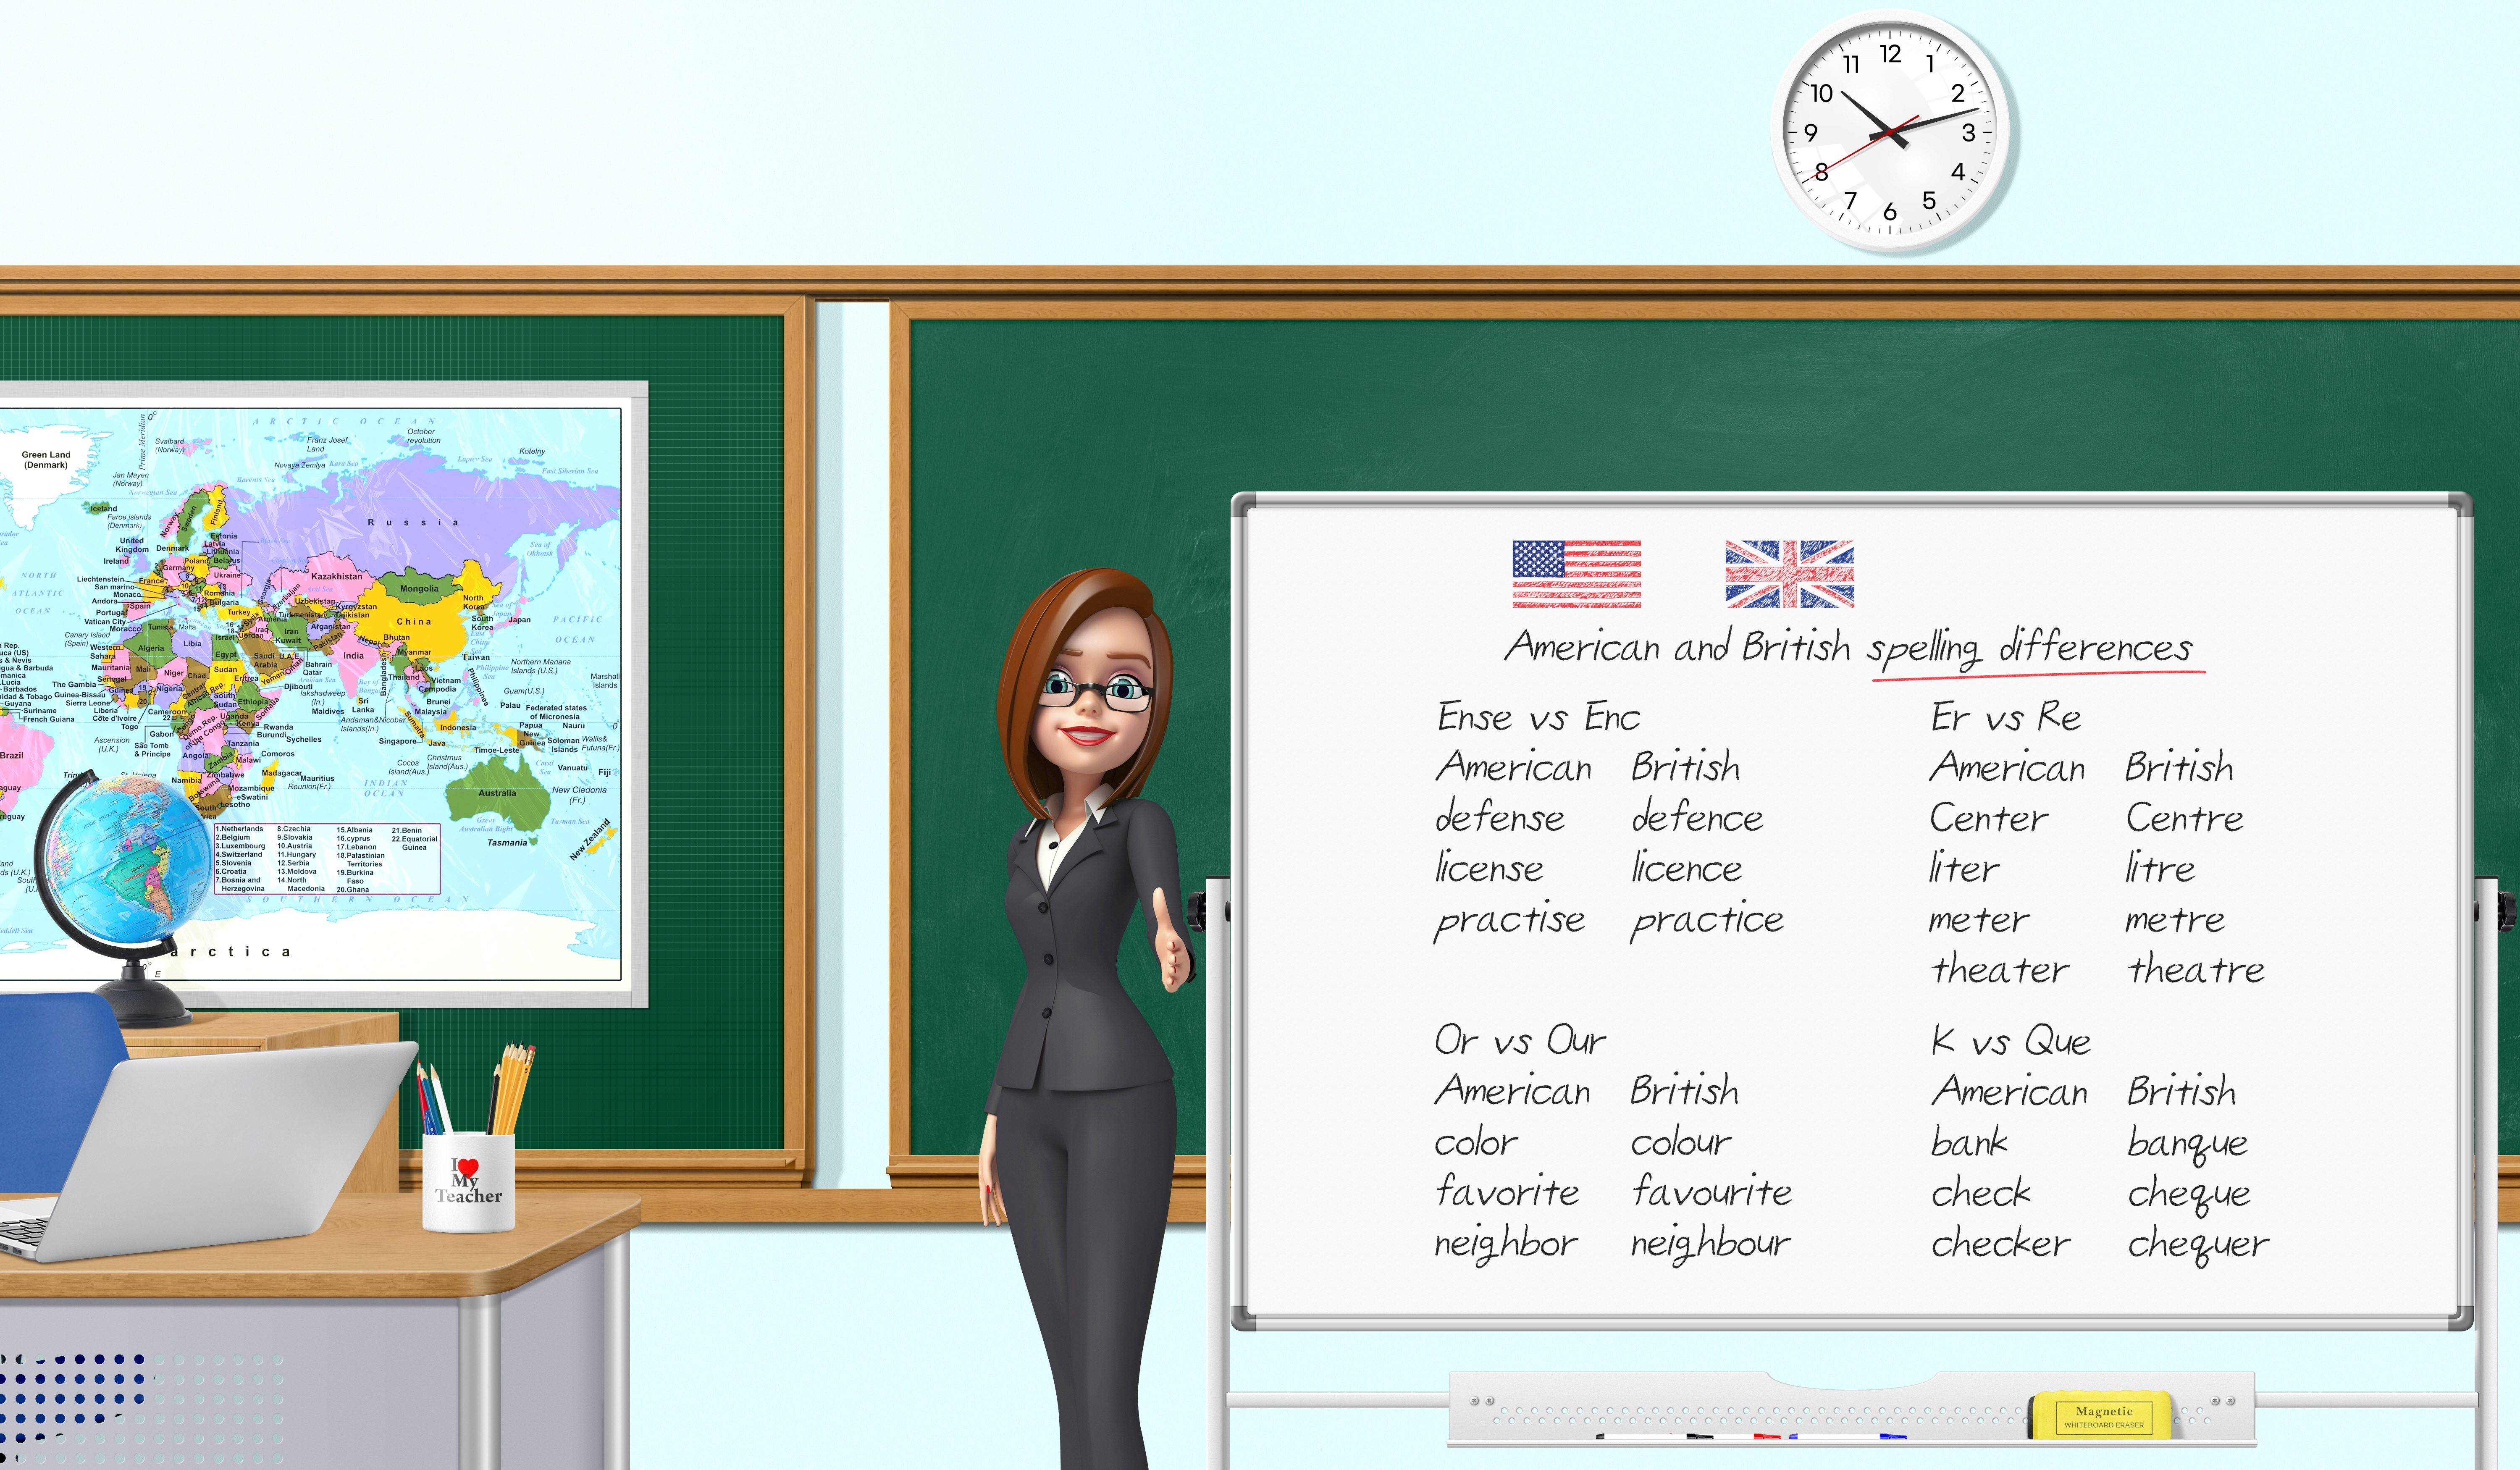 General 6000x3500 teachers classroom typography map text clocks time looking at viewer standing shoulder length hair cup white boots globes laptop pencils desk American flag British flag Eraser red lipstick lipstick smiling teeth chalkboard digital art